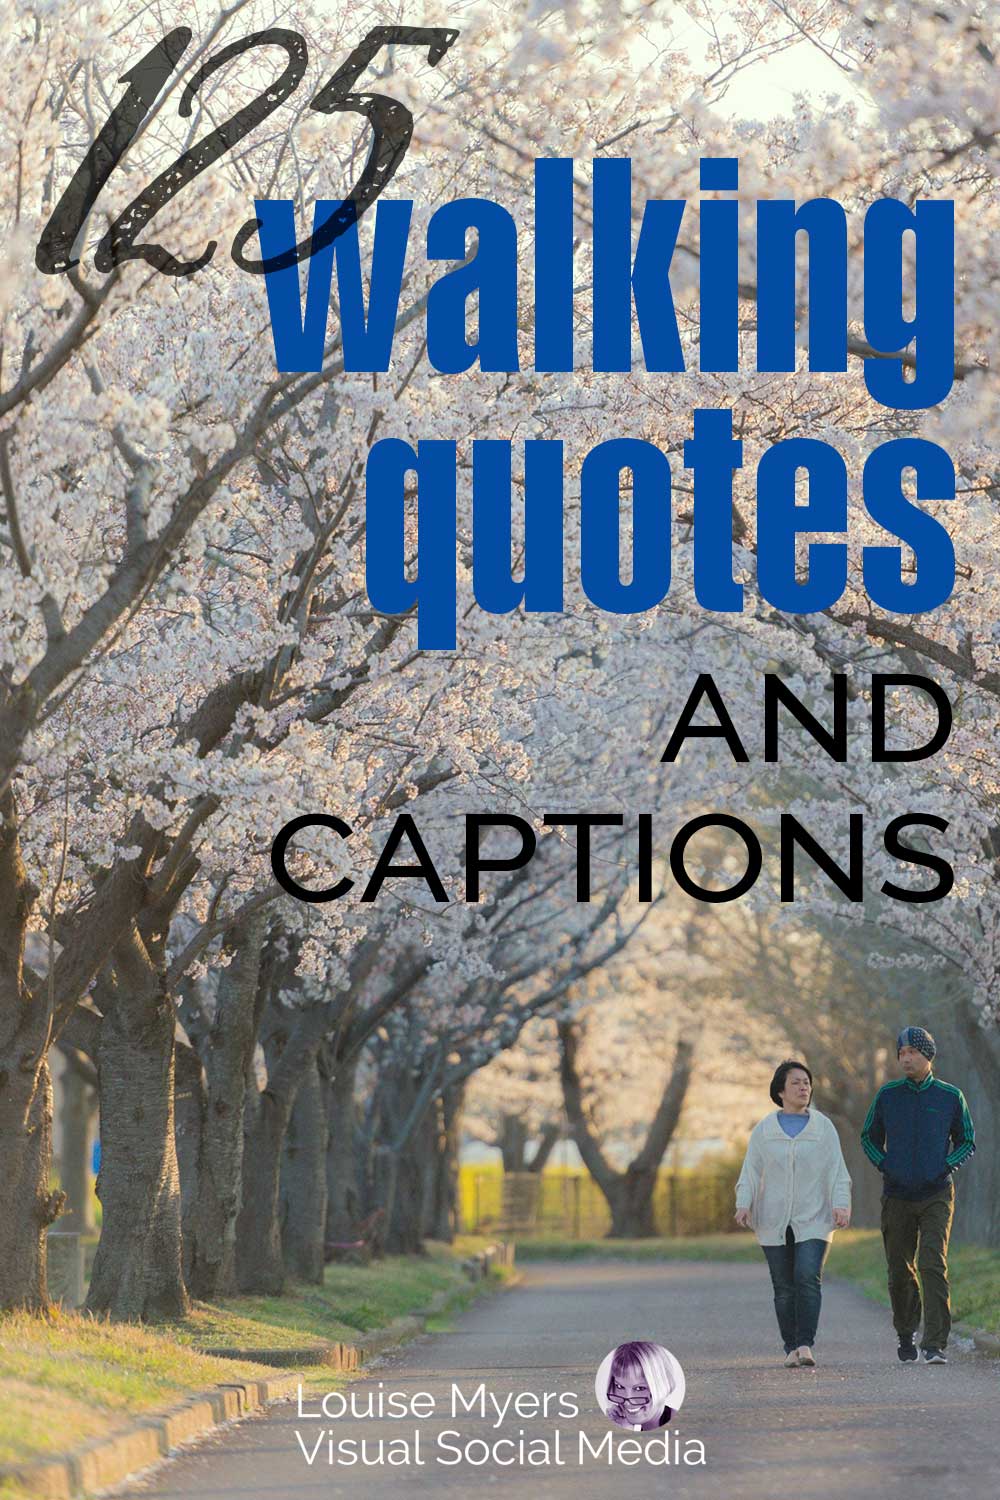 couple walk under flower trees with words 125 walking quotes and captions.